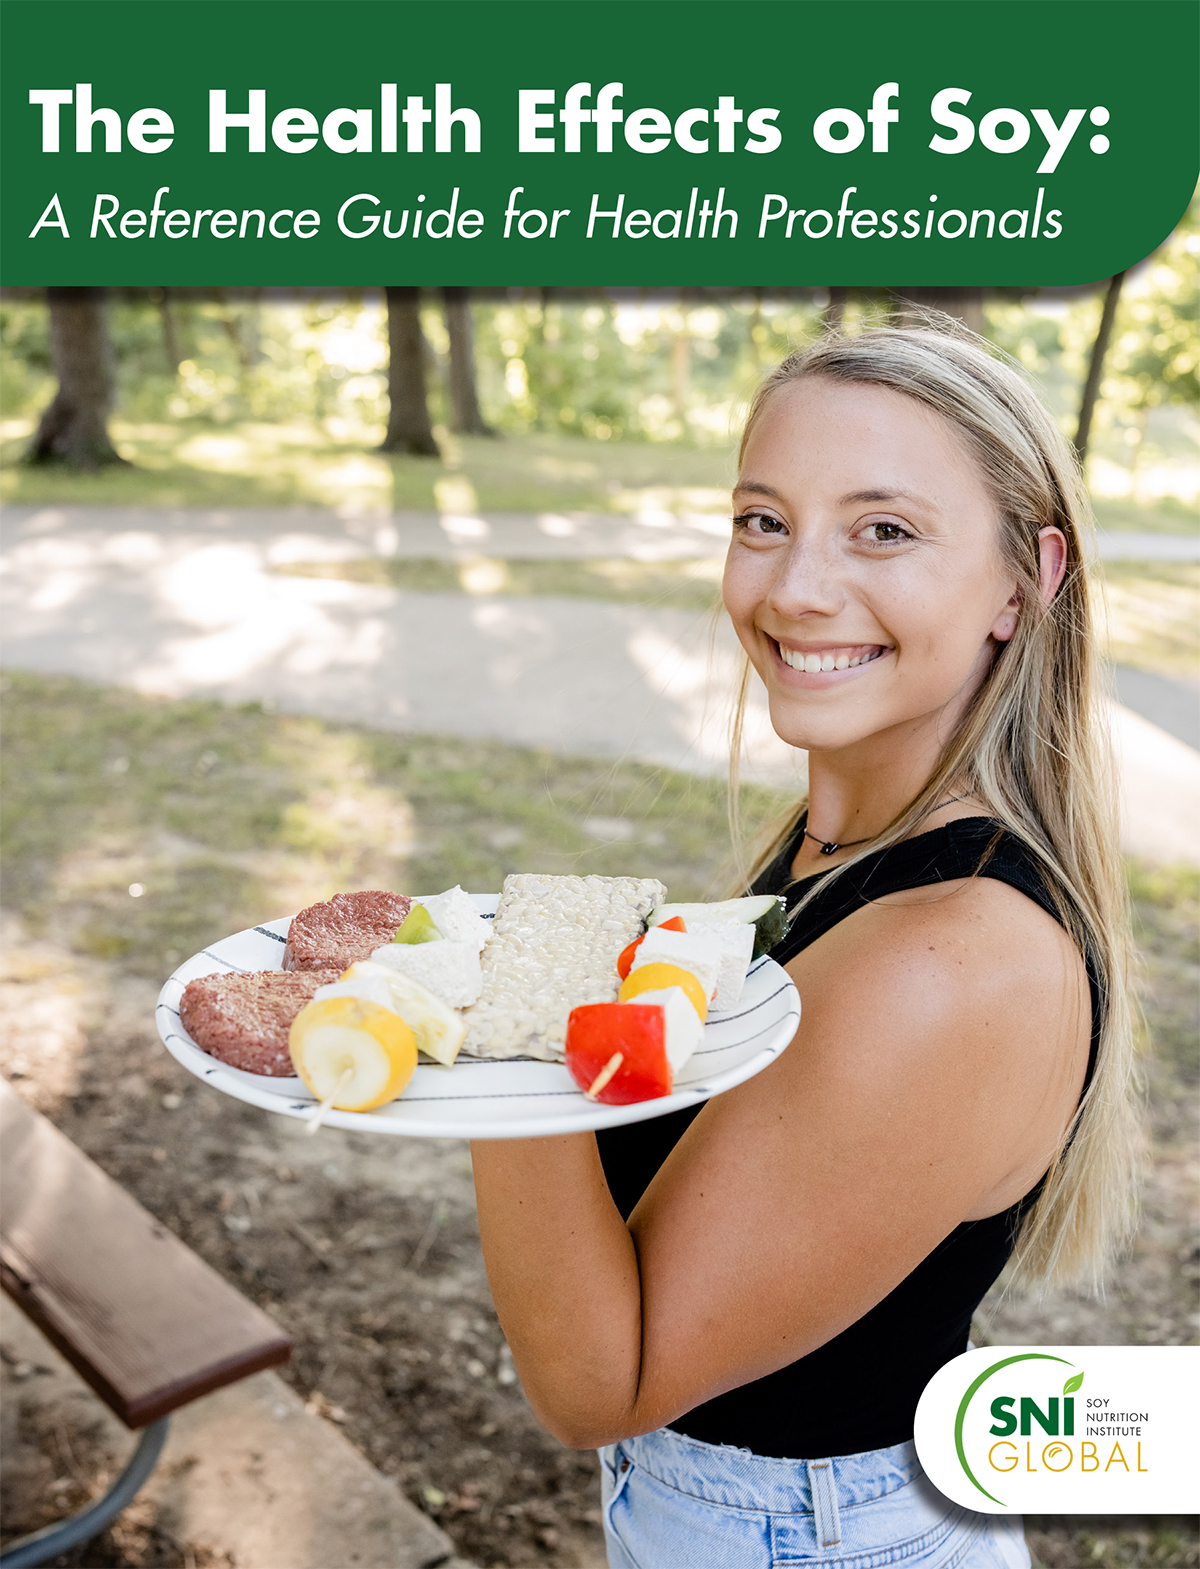 The Health Effects of Soy - A reference guide for health professionals